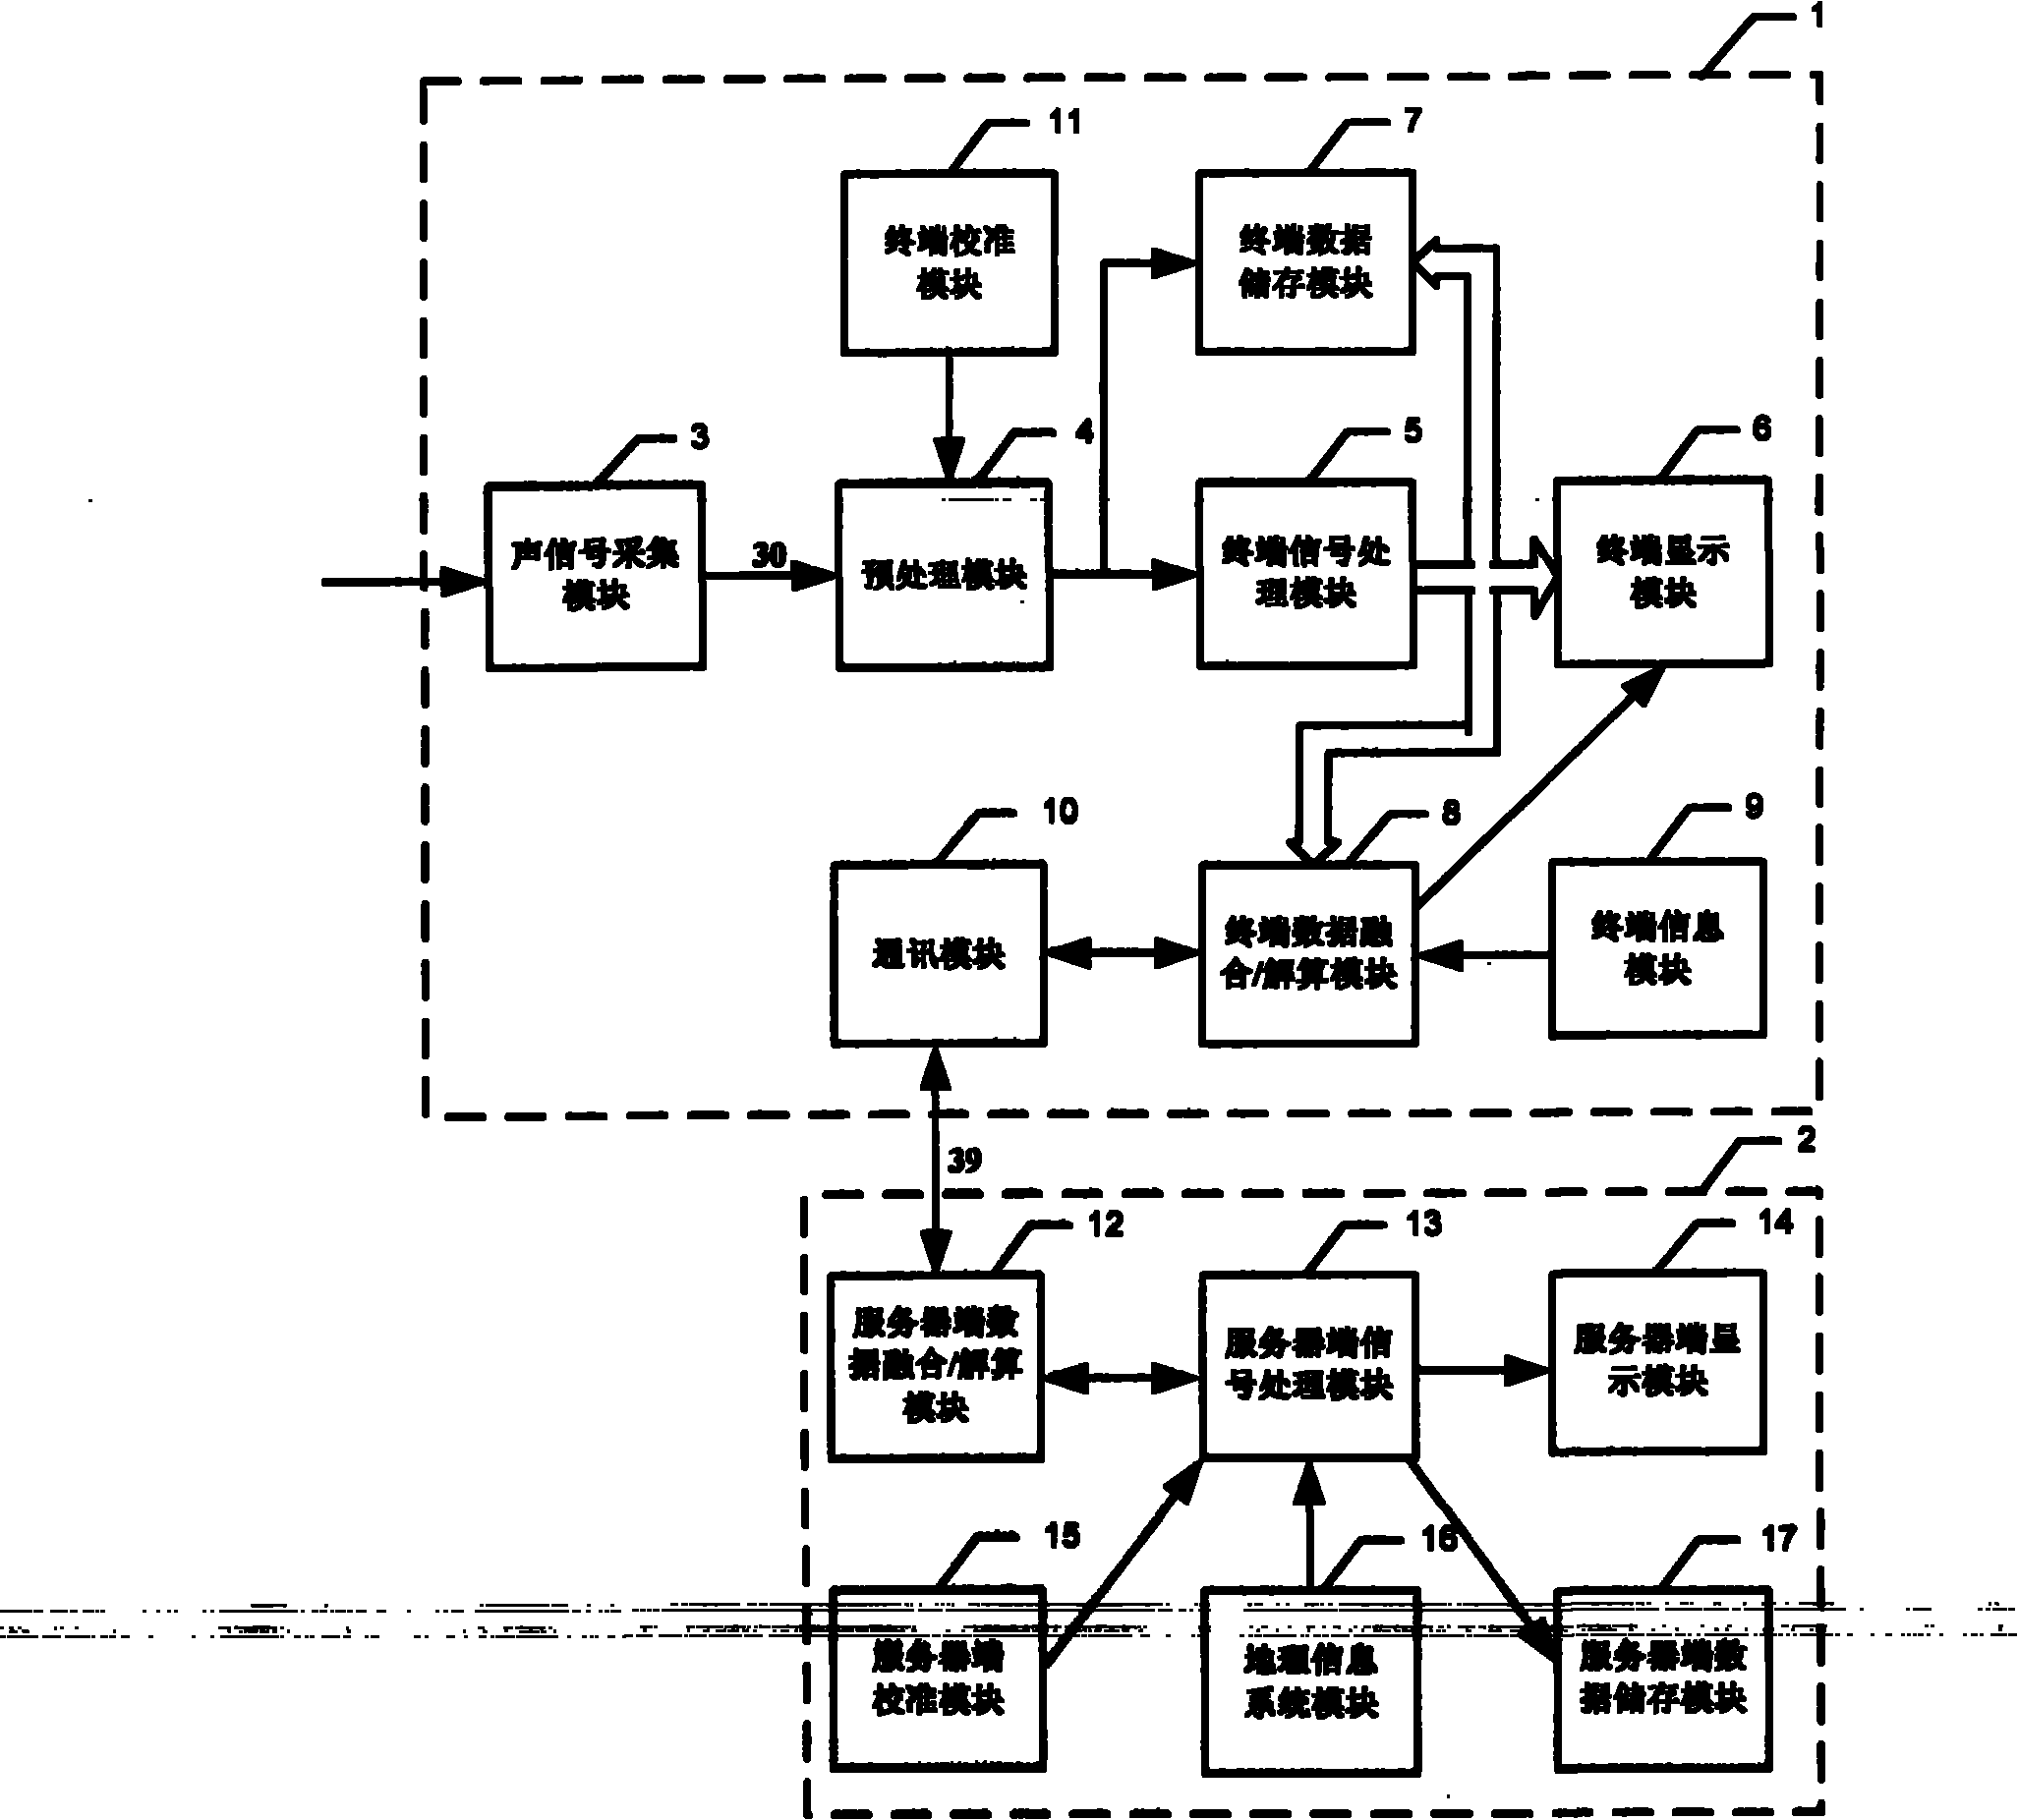 Acoustic signal processing system for mobile portable device and processing method thereof